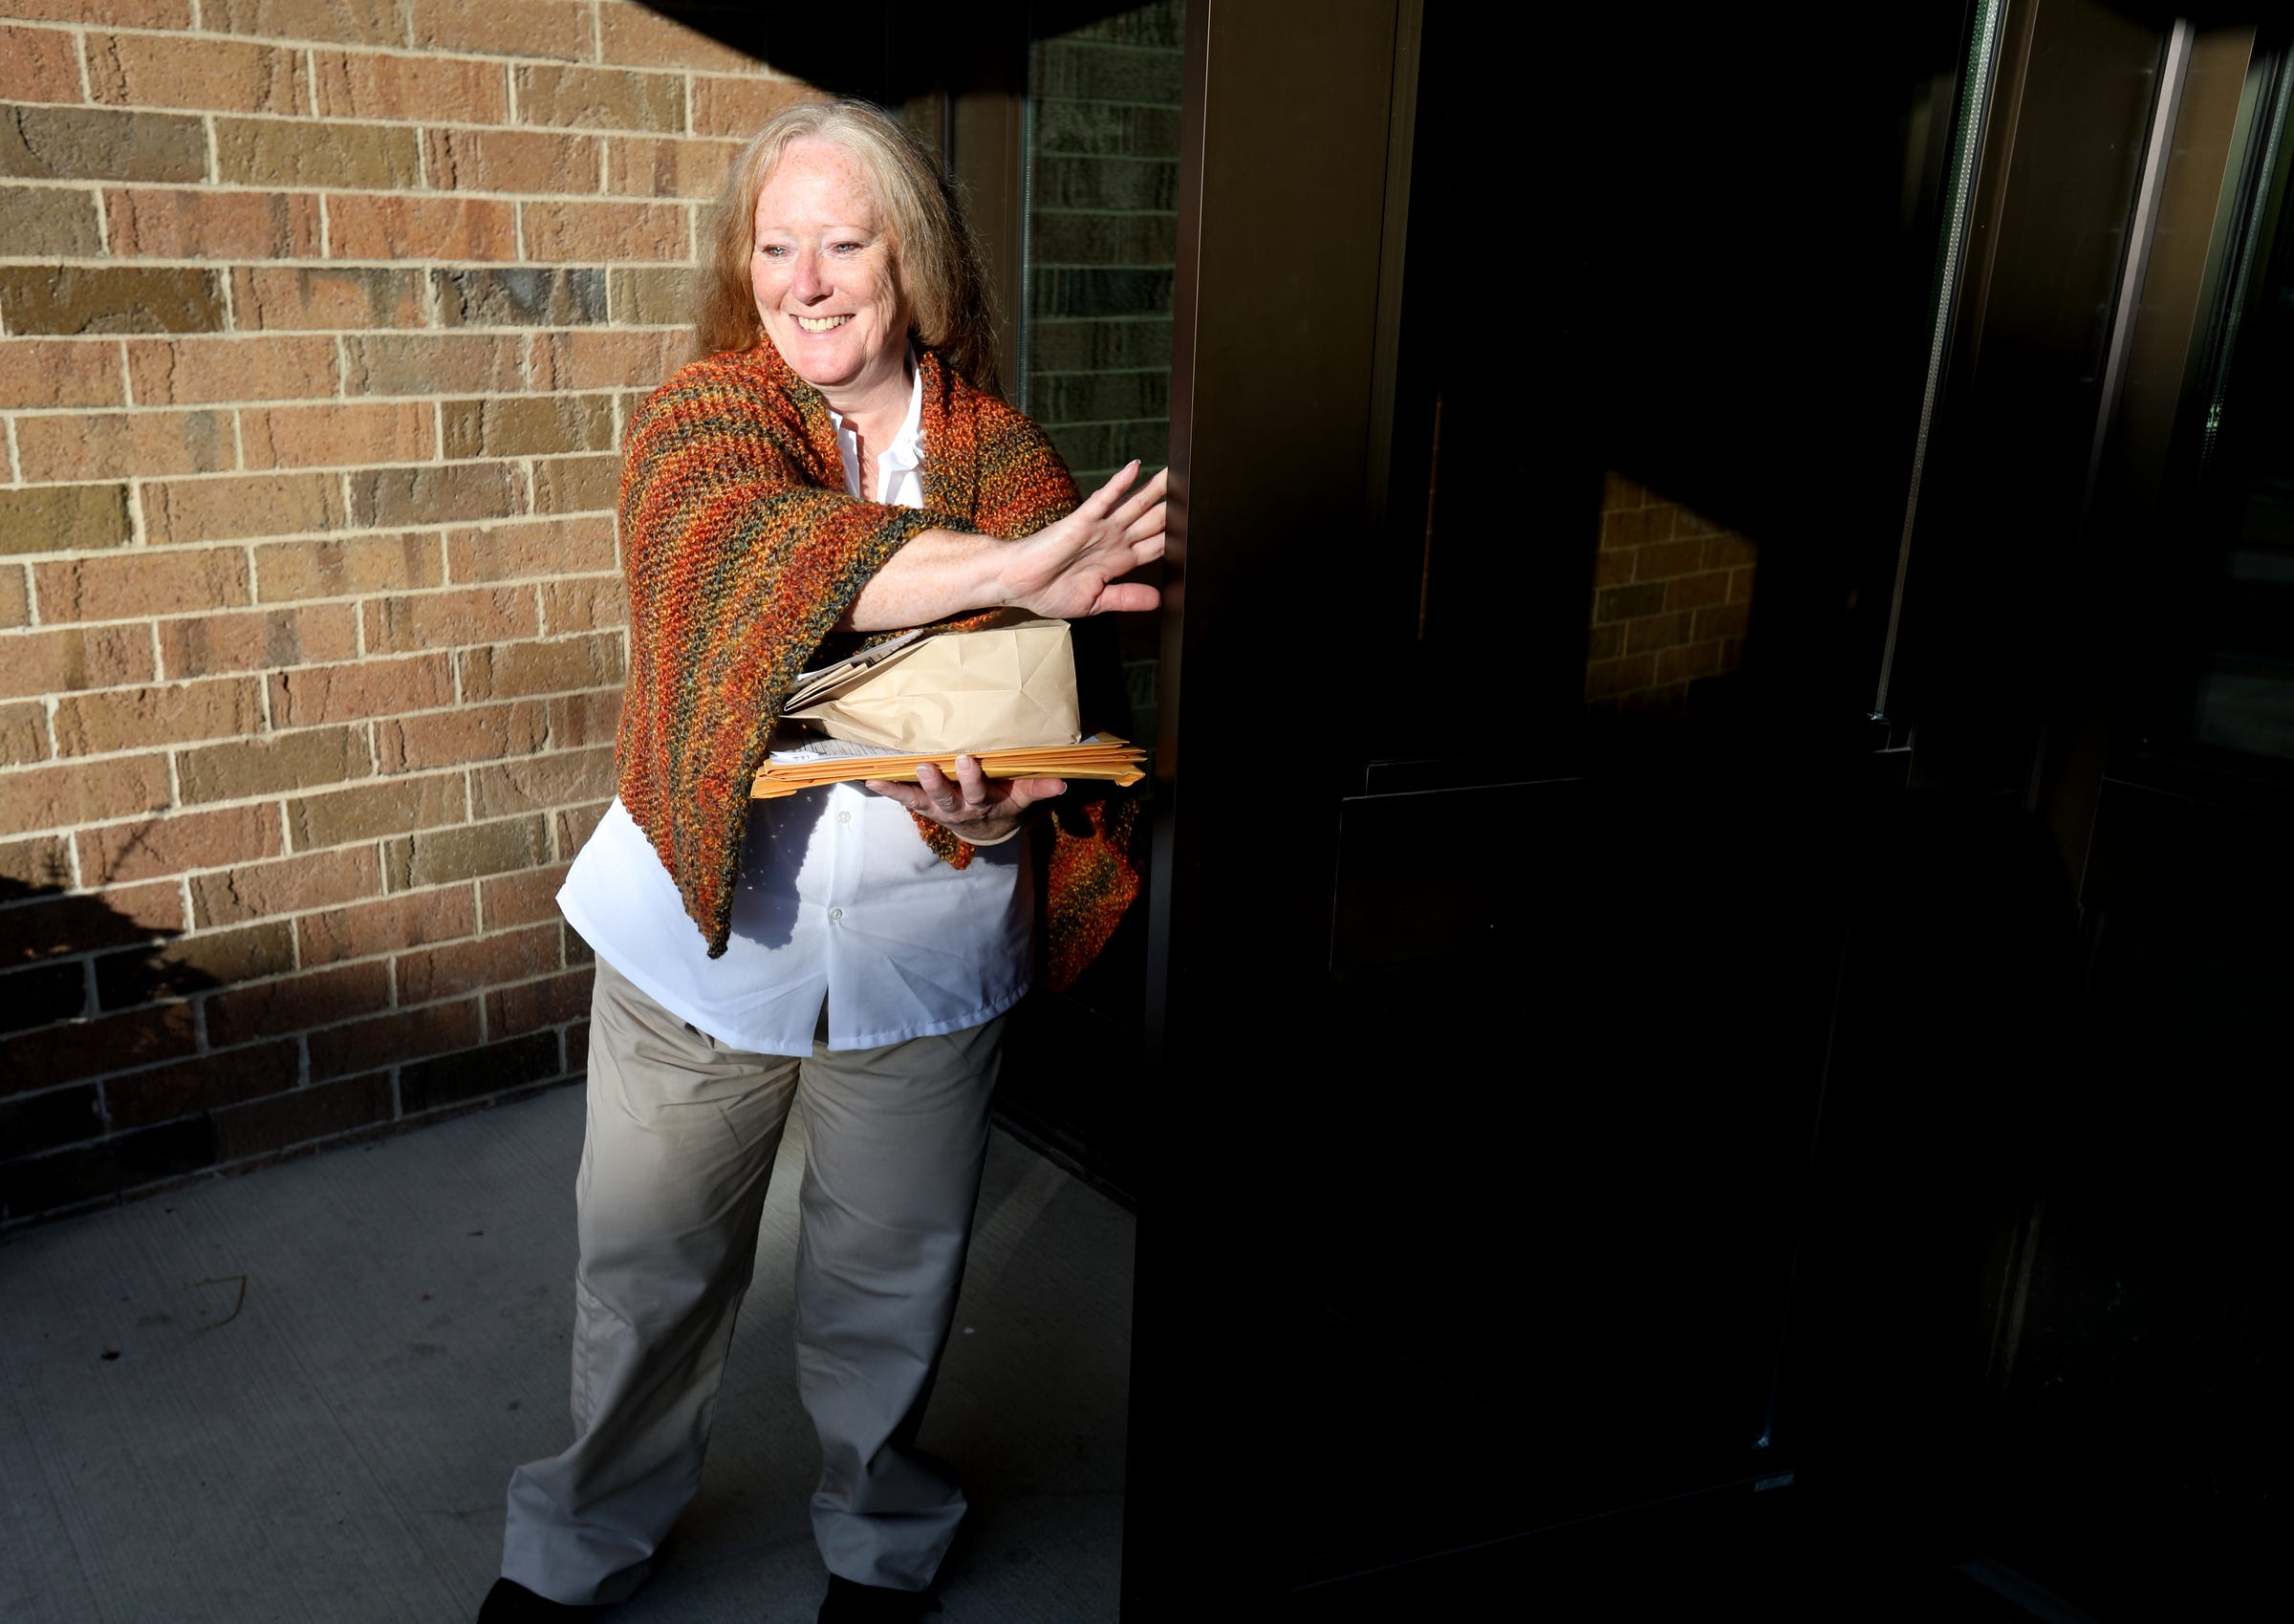 Edith Turner walks out of the Women's Huron Valley Correctional Facility in Ypsilanti on Tuesday, September 24, 2019, as a free woman after more than 10 years in prison.